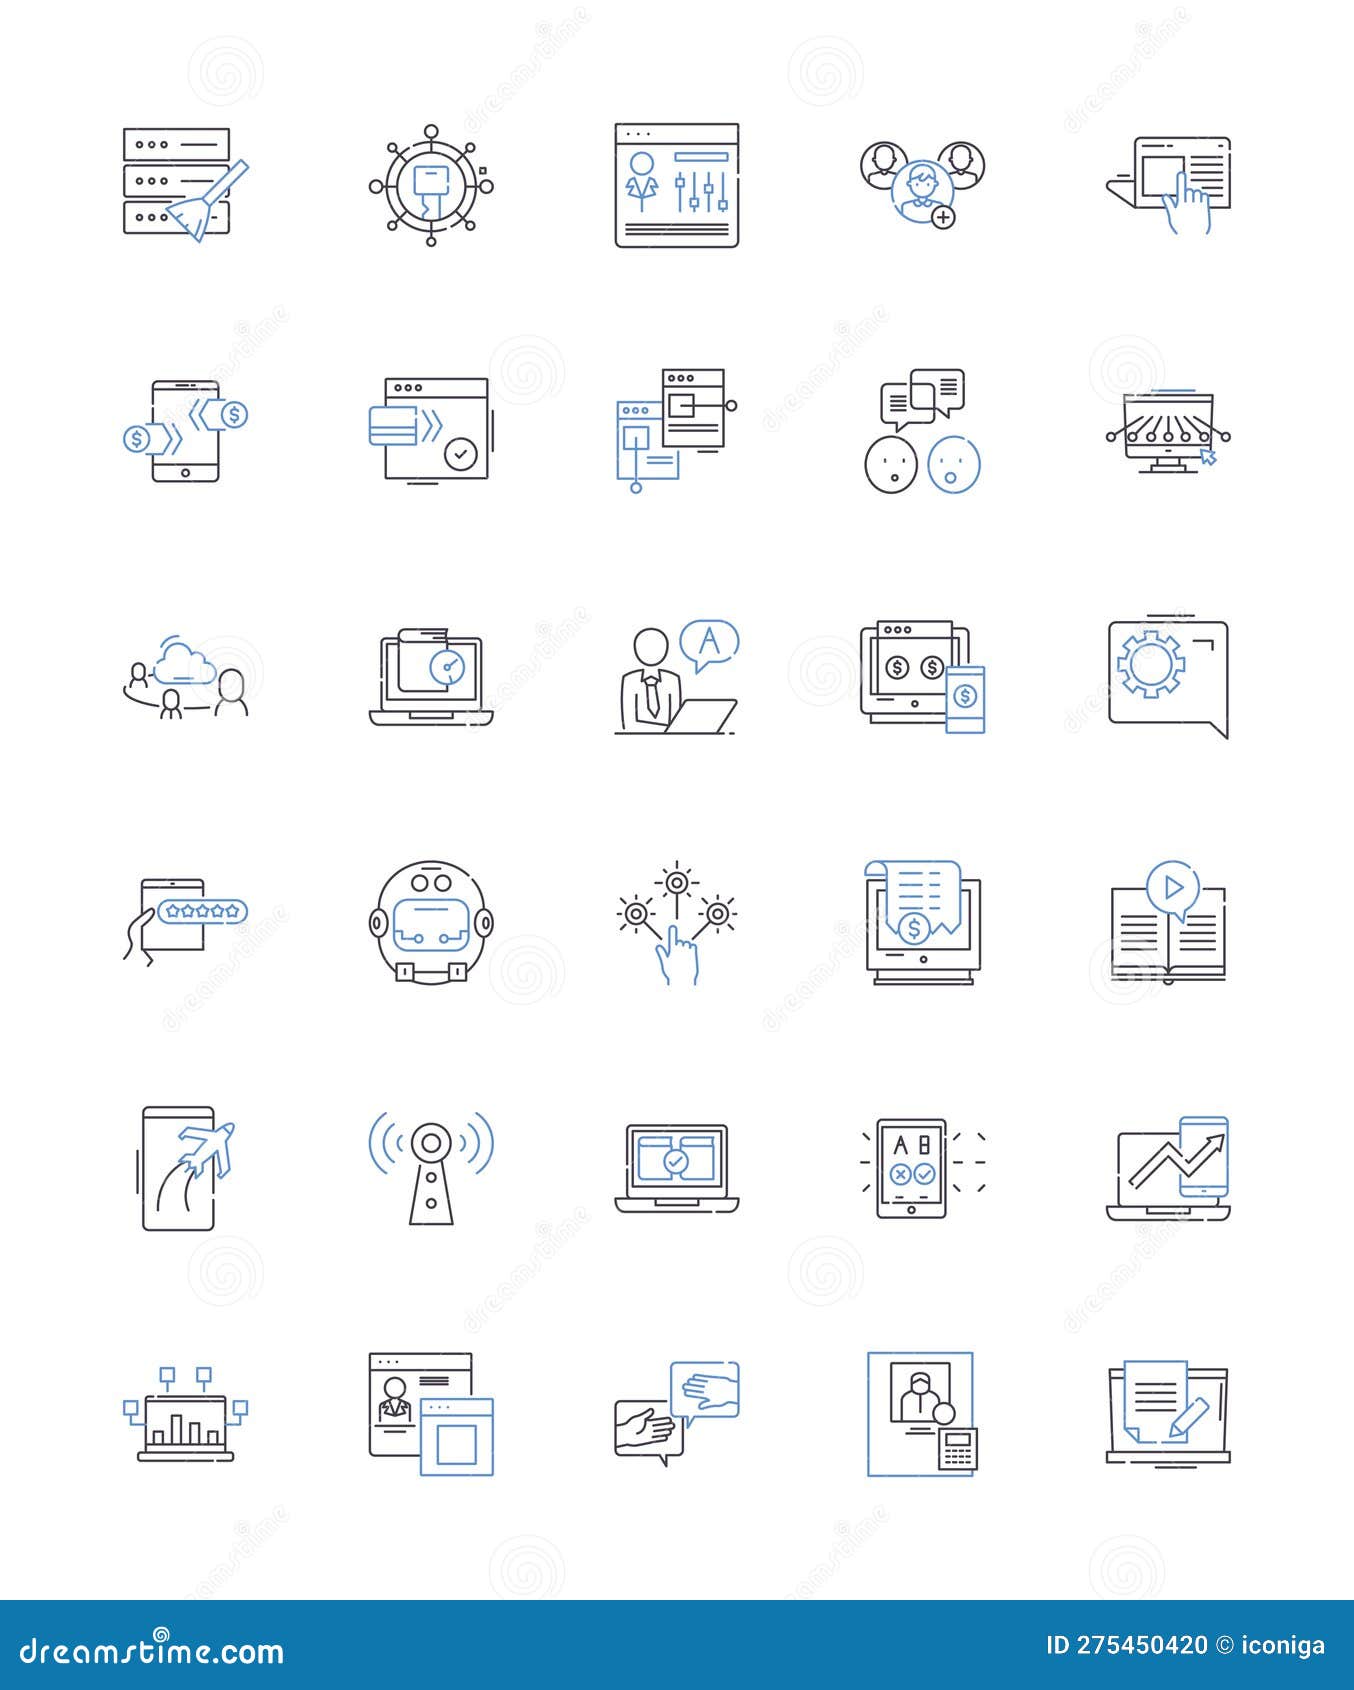 advising line icons collection. counsel, suggest, guide, mentor, recommend, direct, instruct  and linear